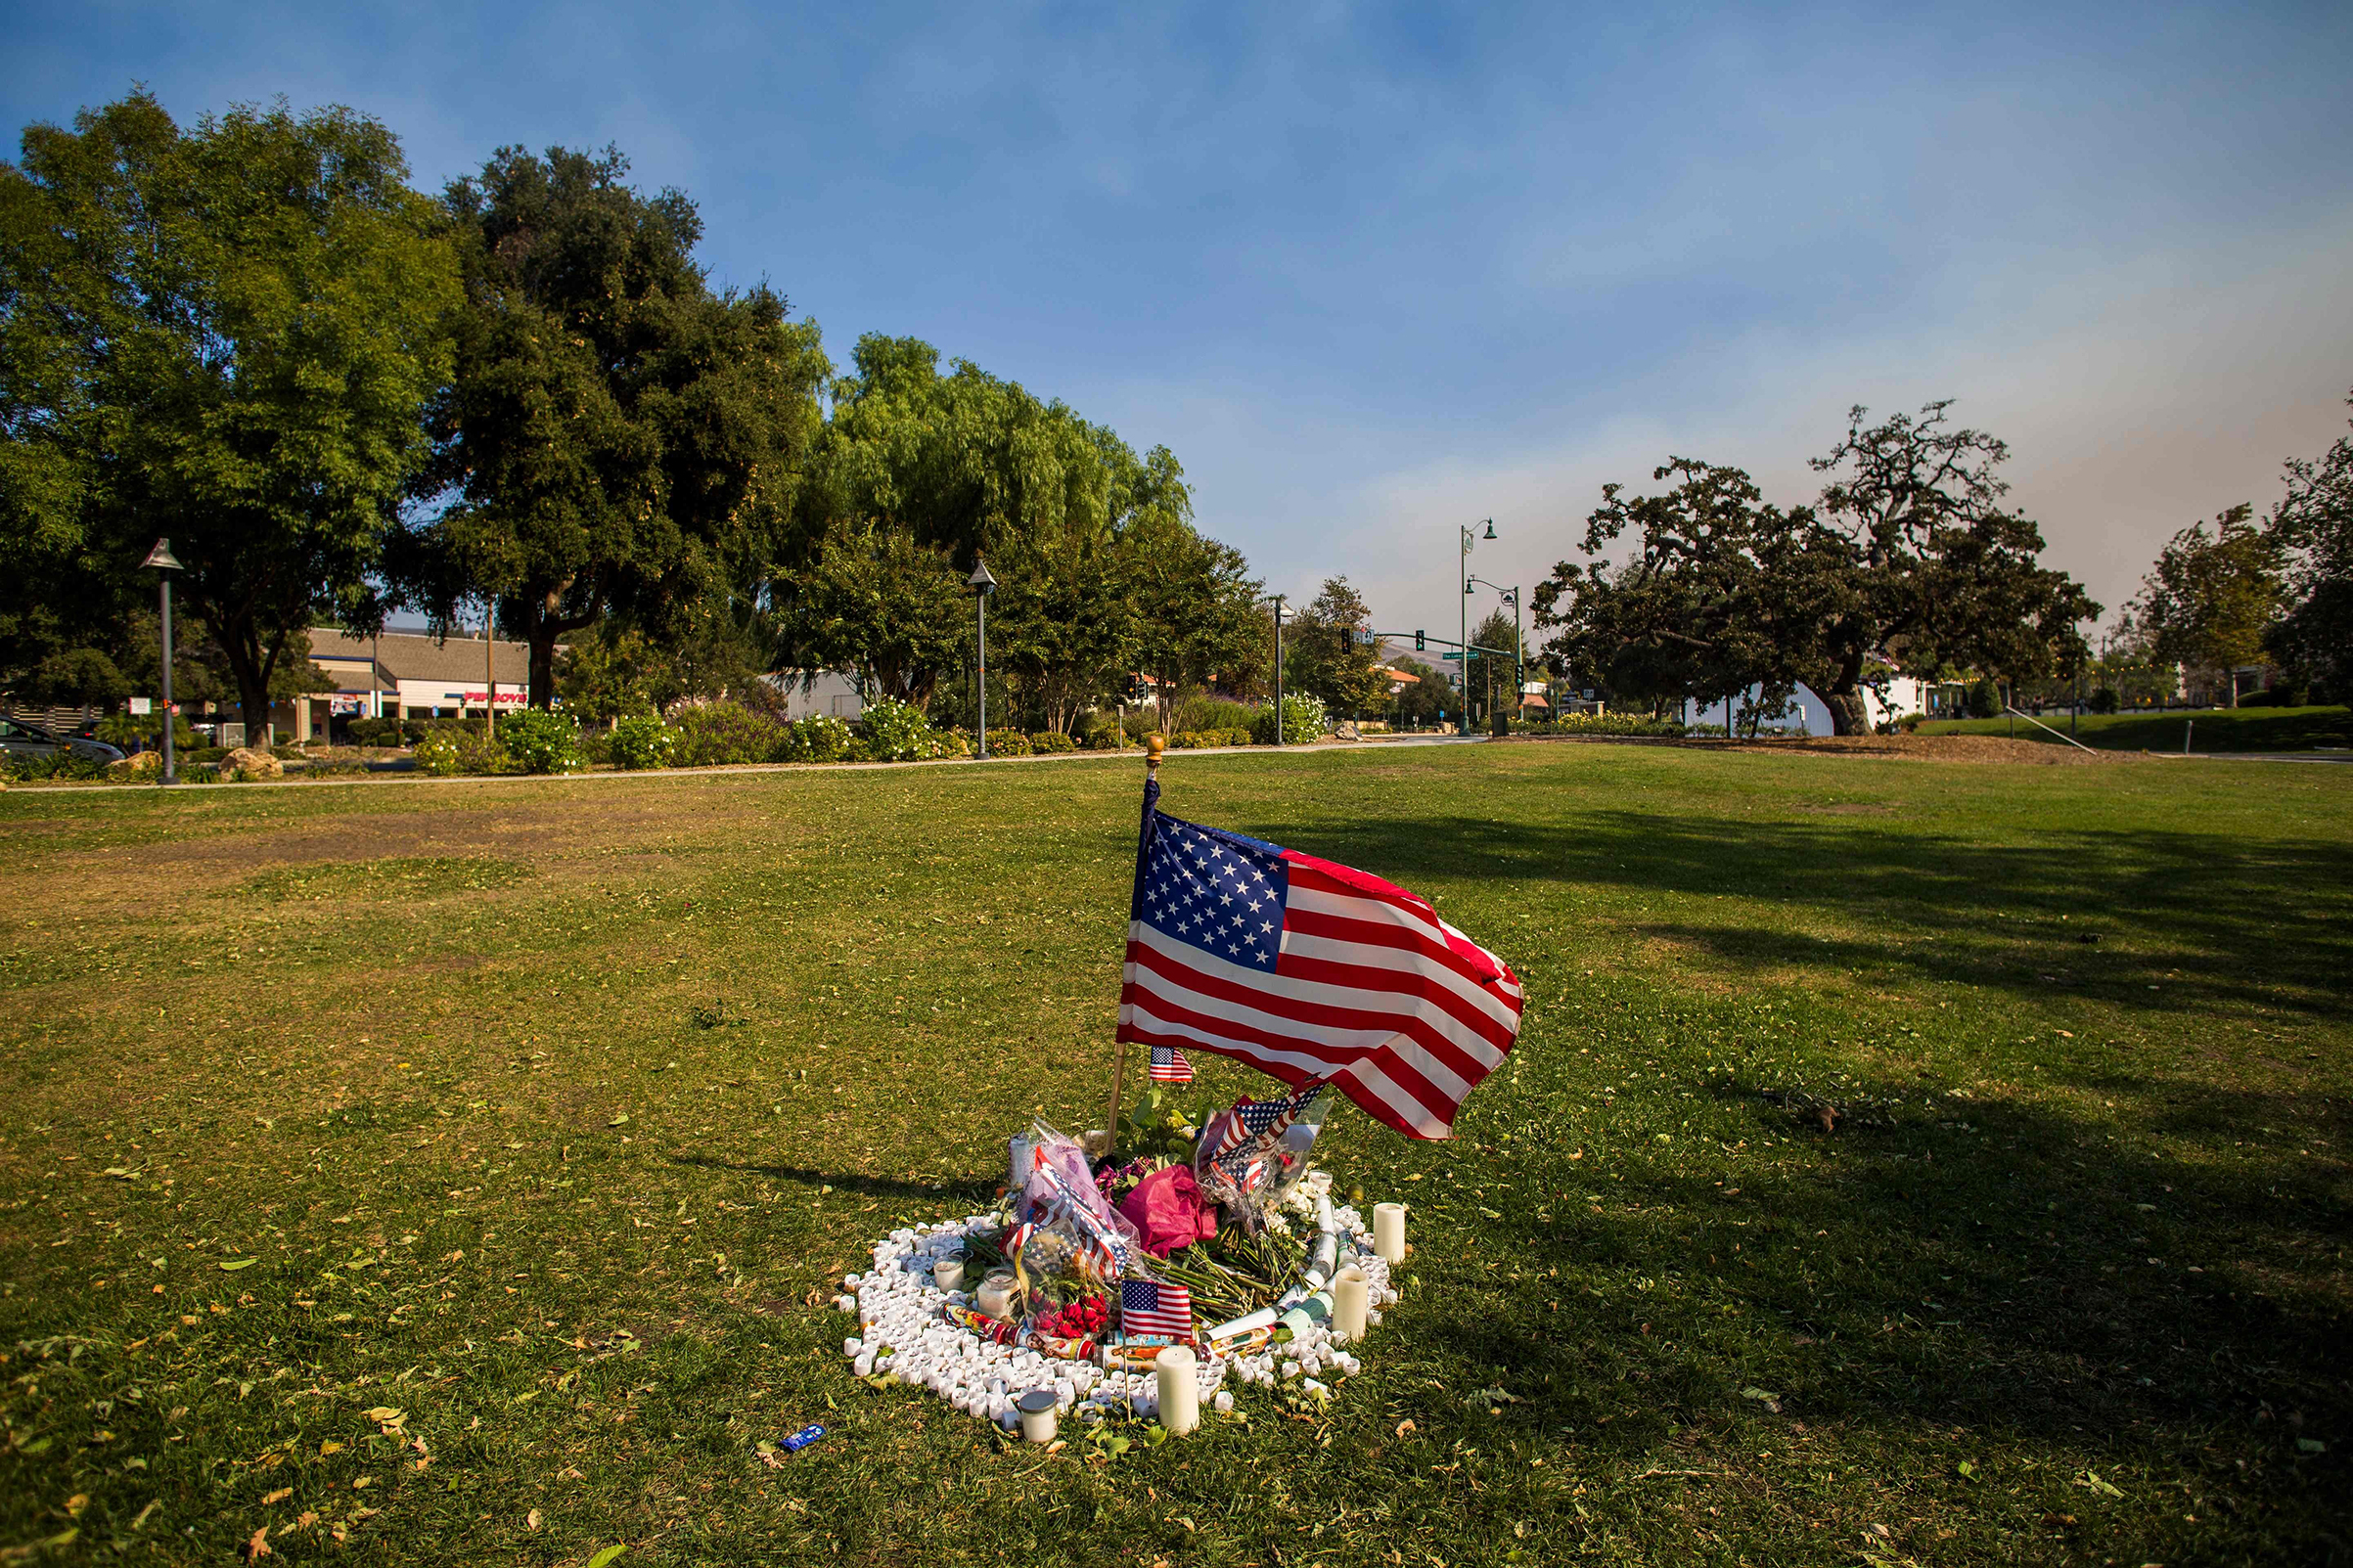 A memorial for the victims of the Thousand Oaks shooting (Apu Gomes—AFP/Getty Images)